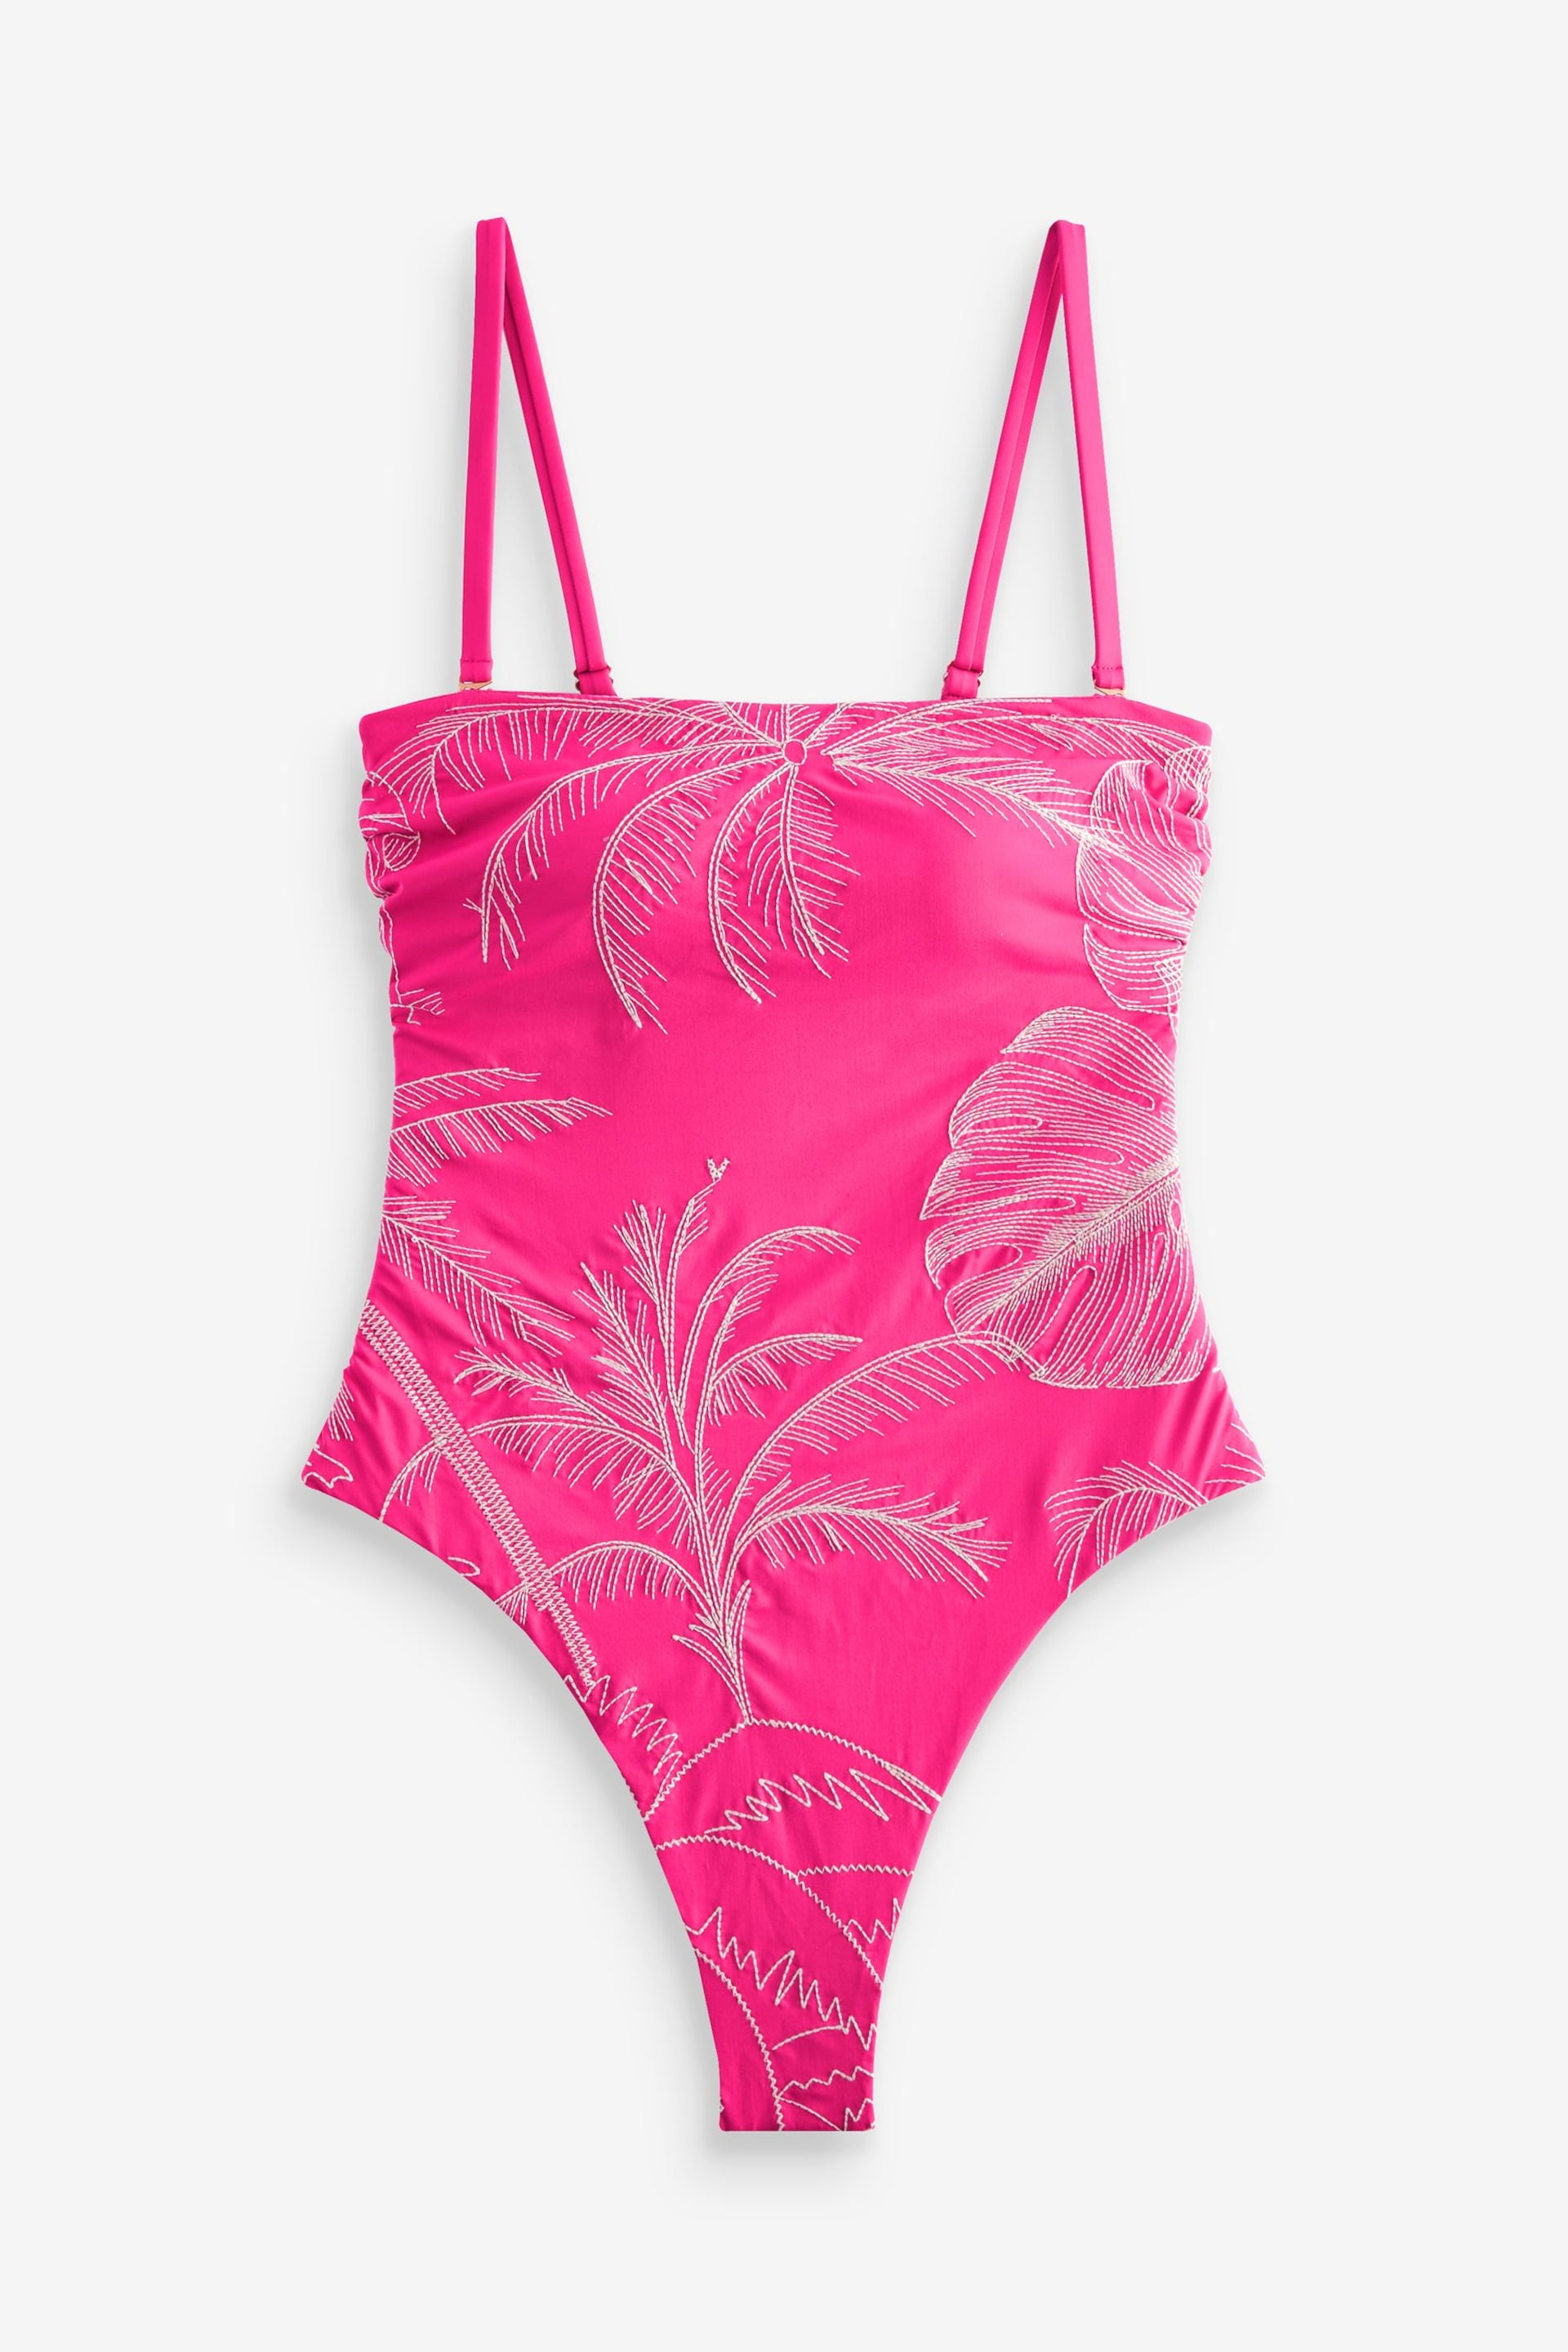 Pink/White Embroidered Bandeau Tummy Shaping Control Swimsuit - Image 6 of 6